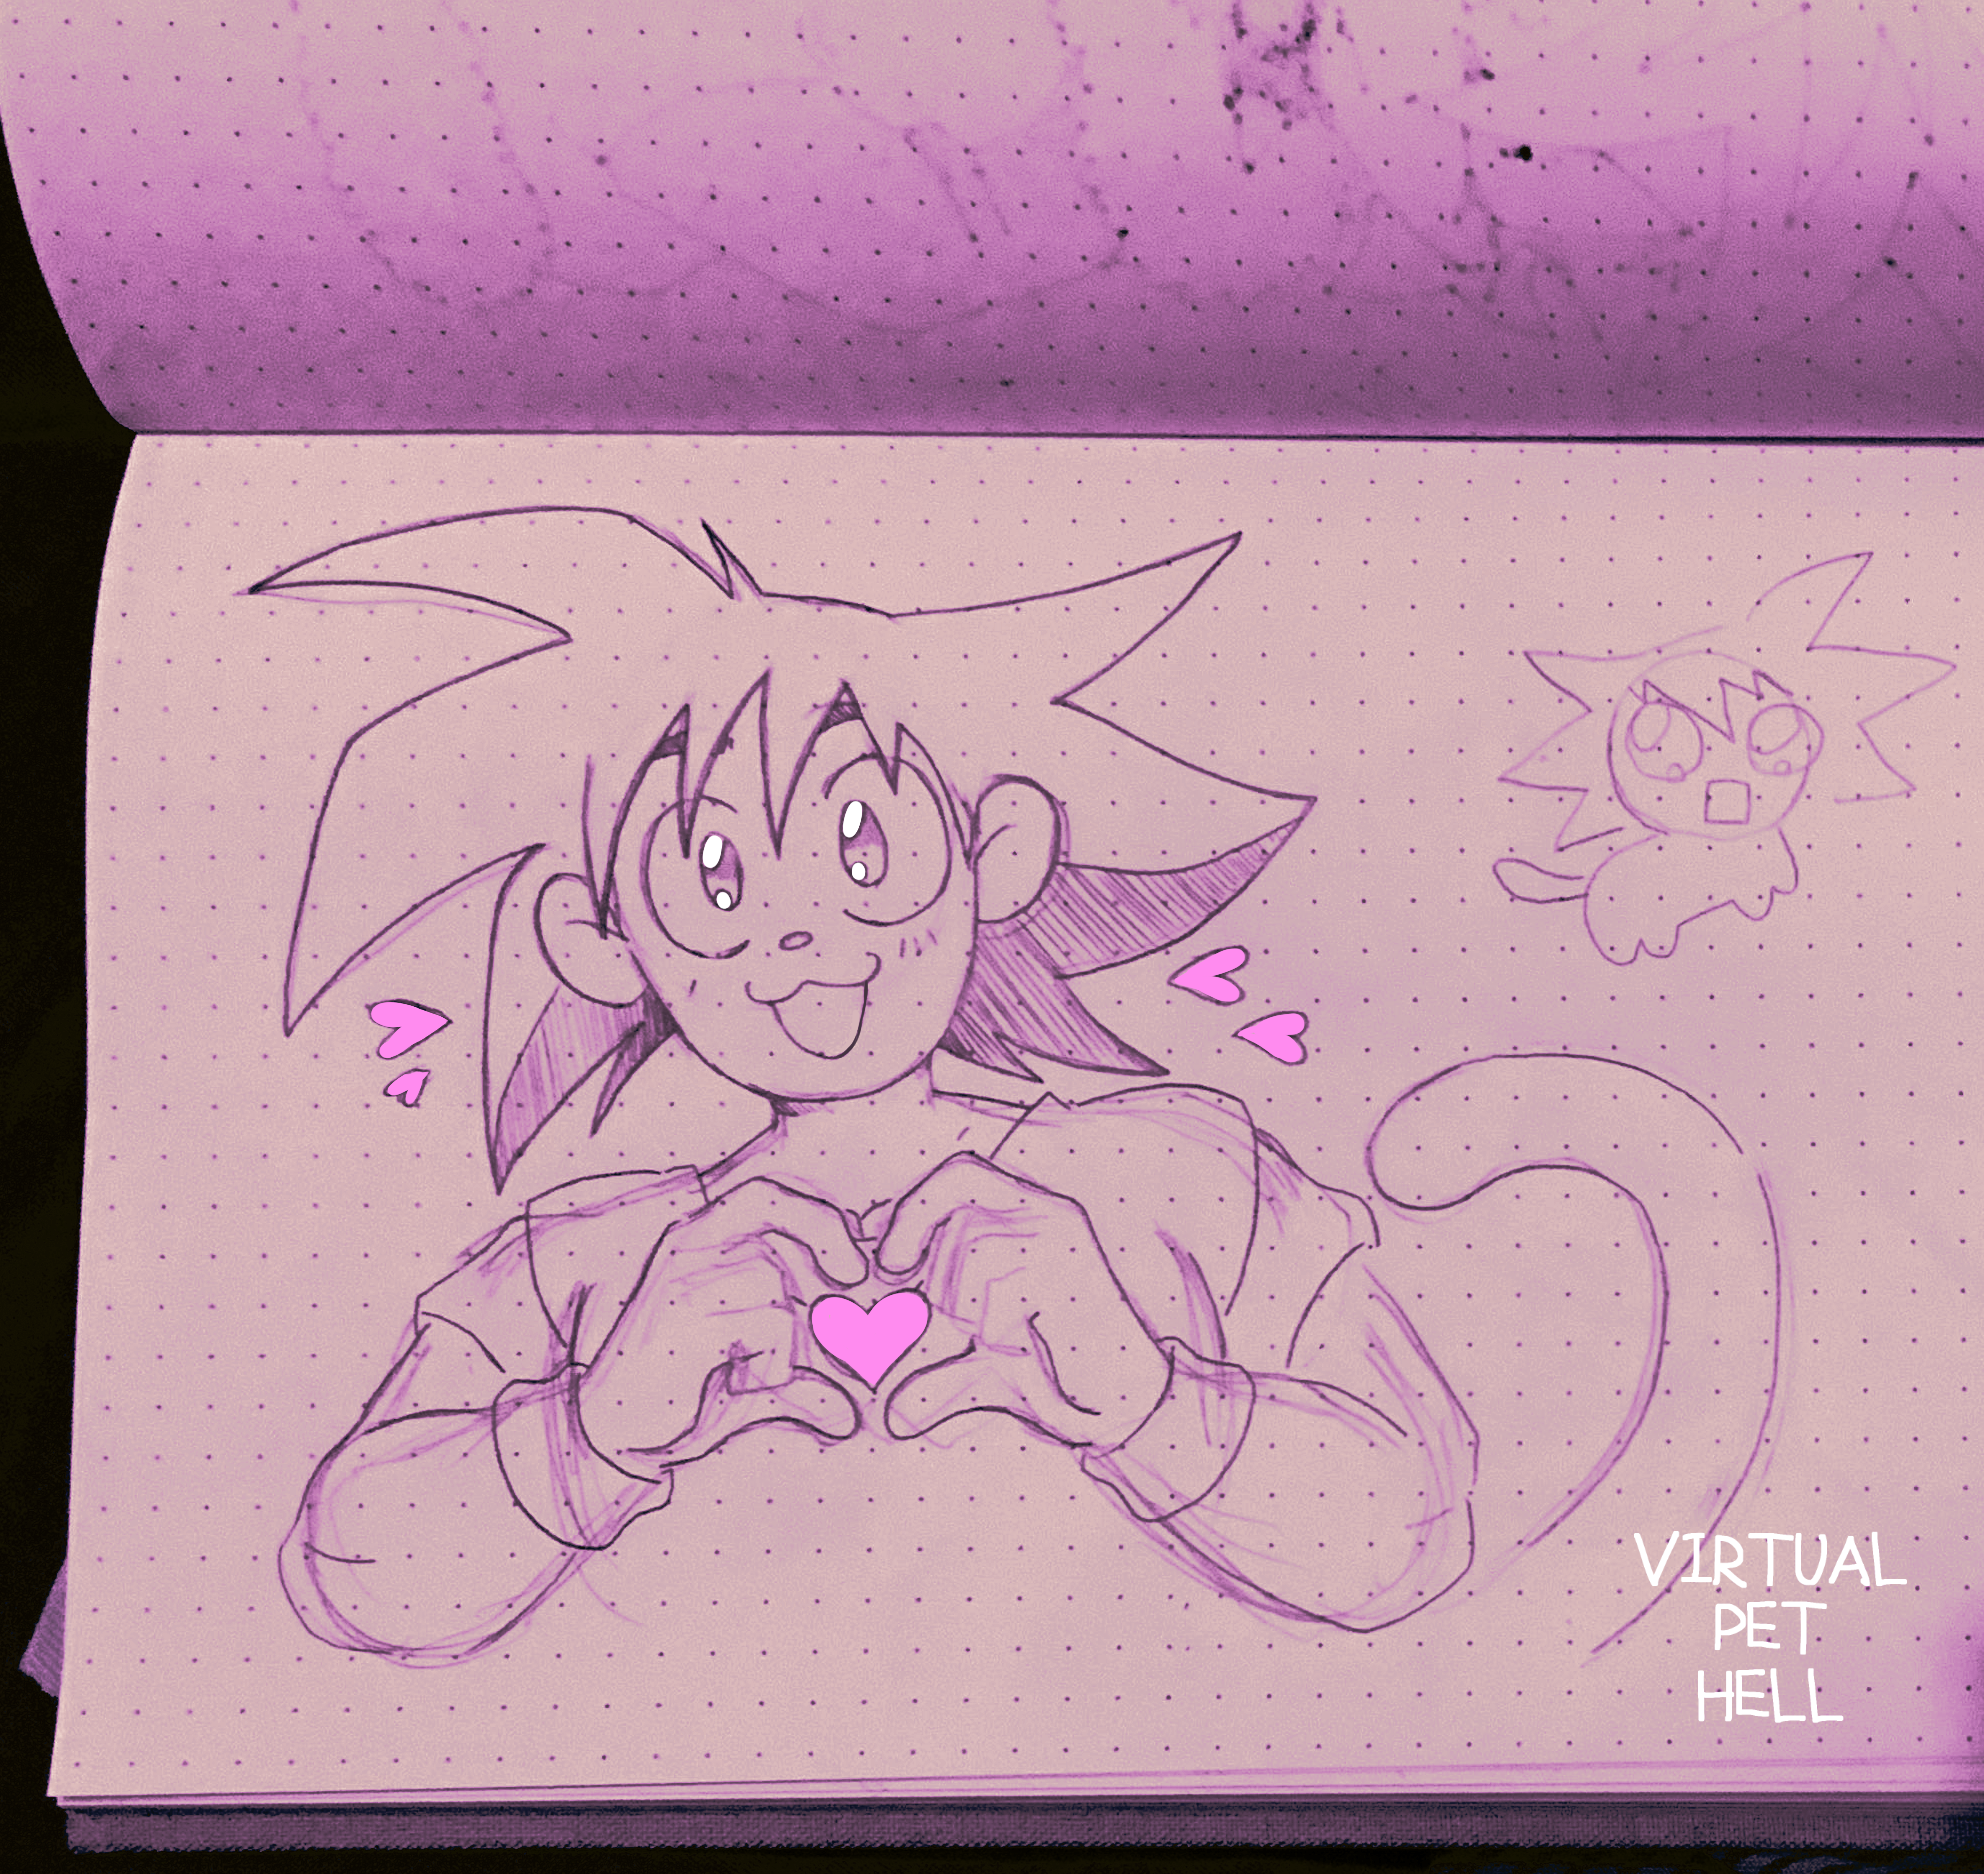 pencil sketch of goku making a heart shape with his hands